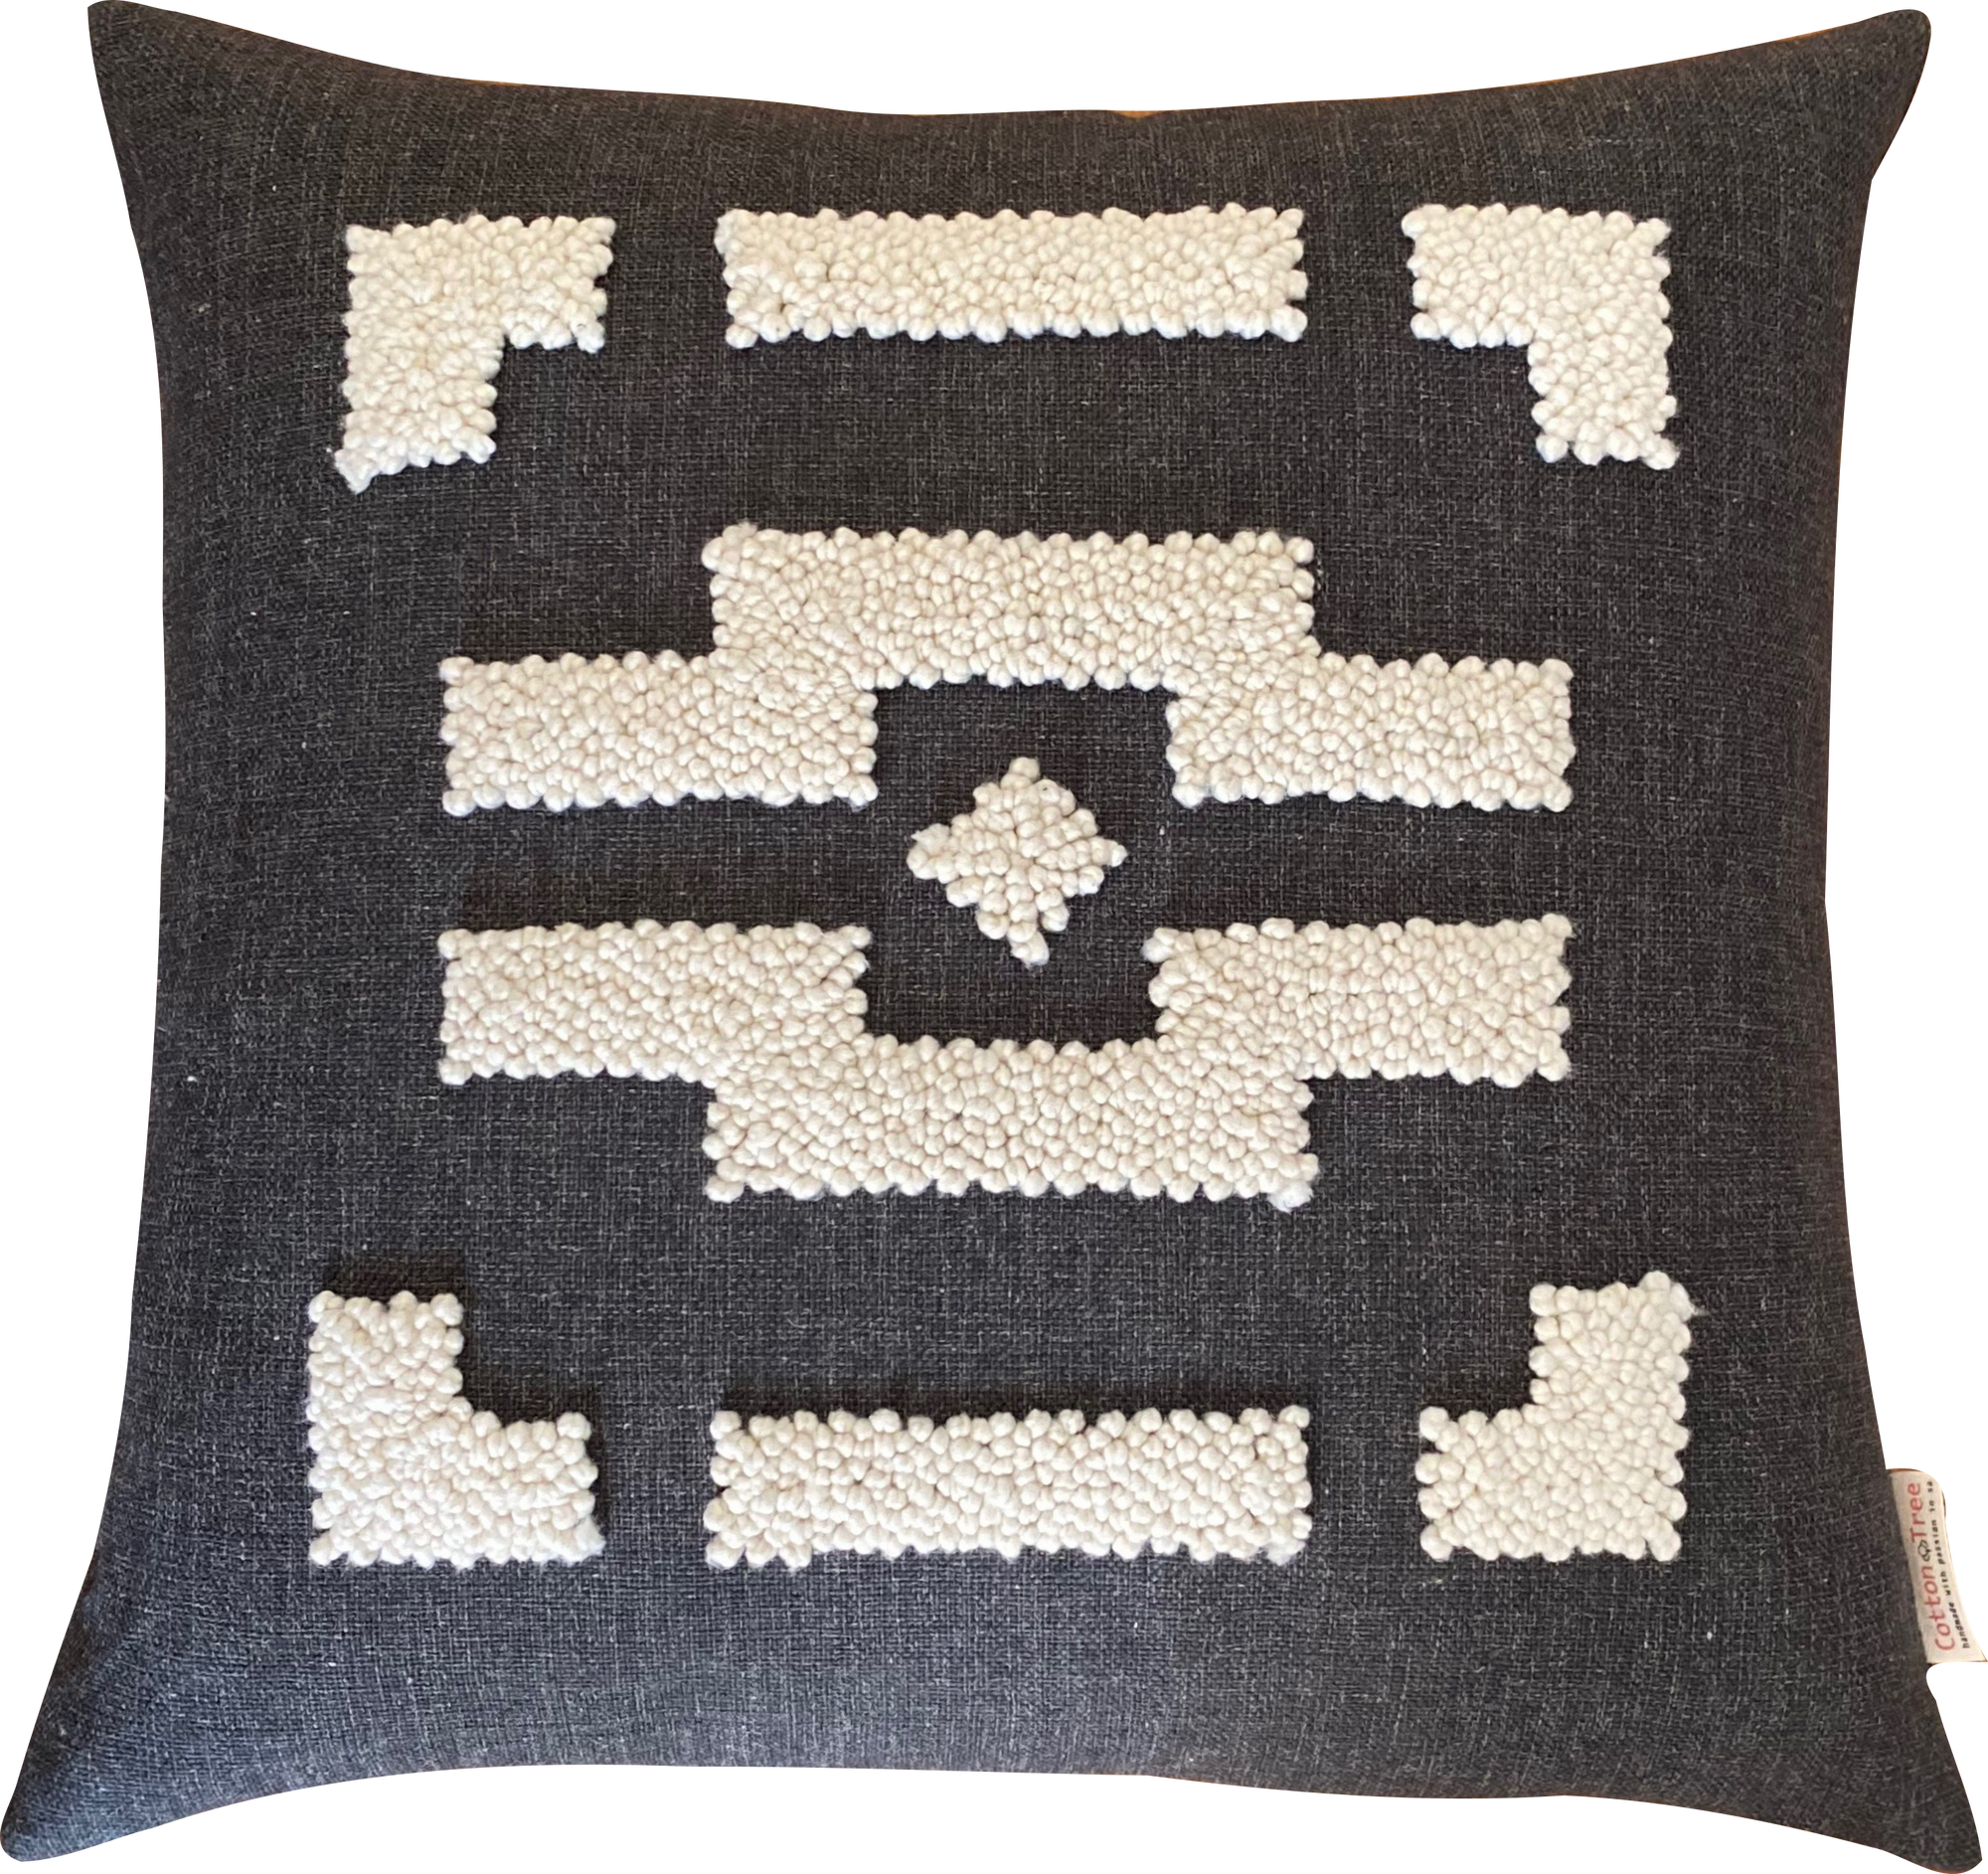 Punch Needle Cushion Cover - Ndebele Pattern 3